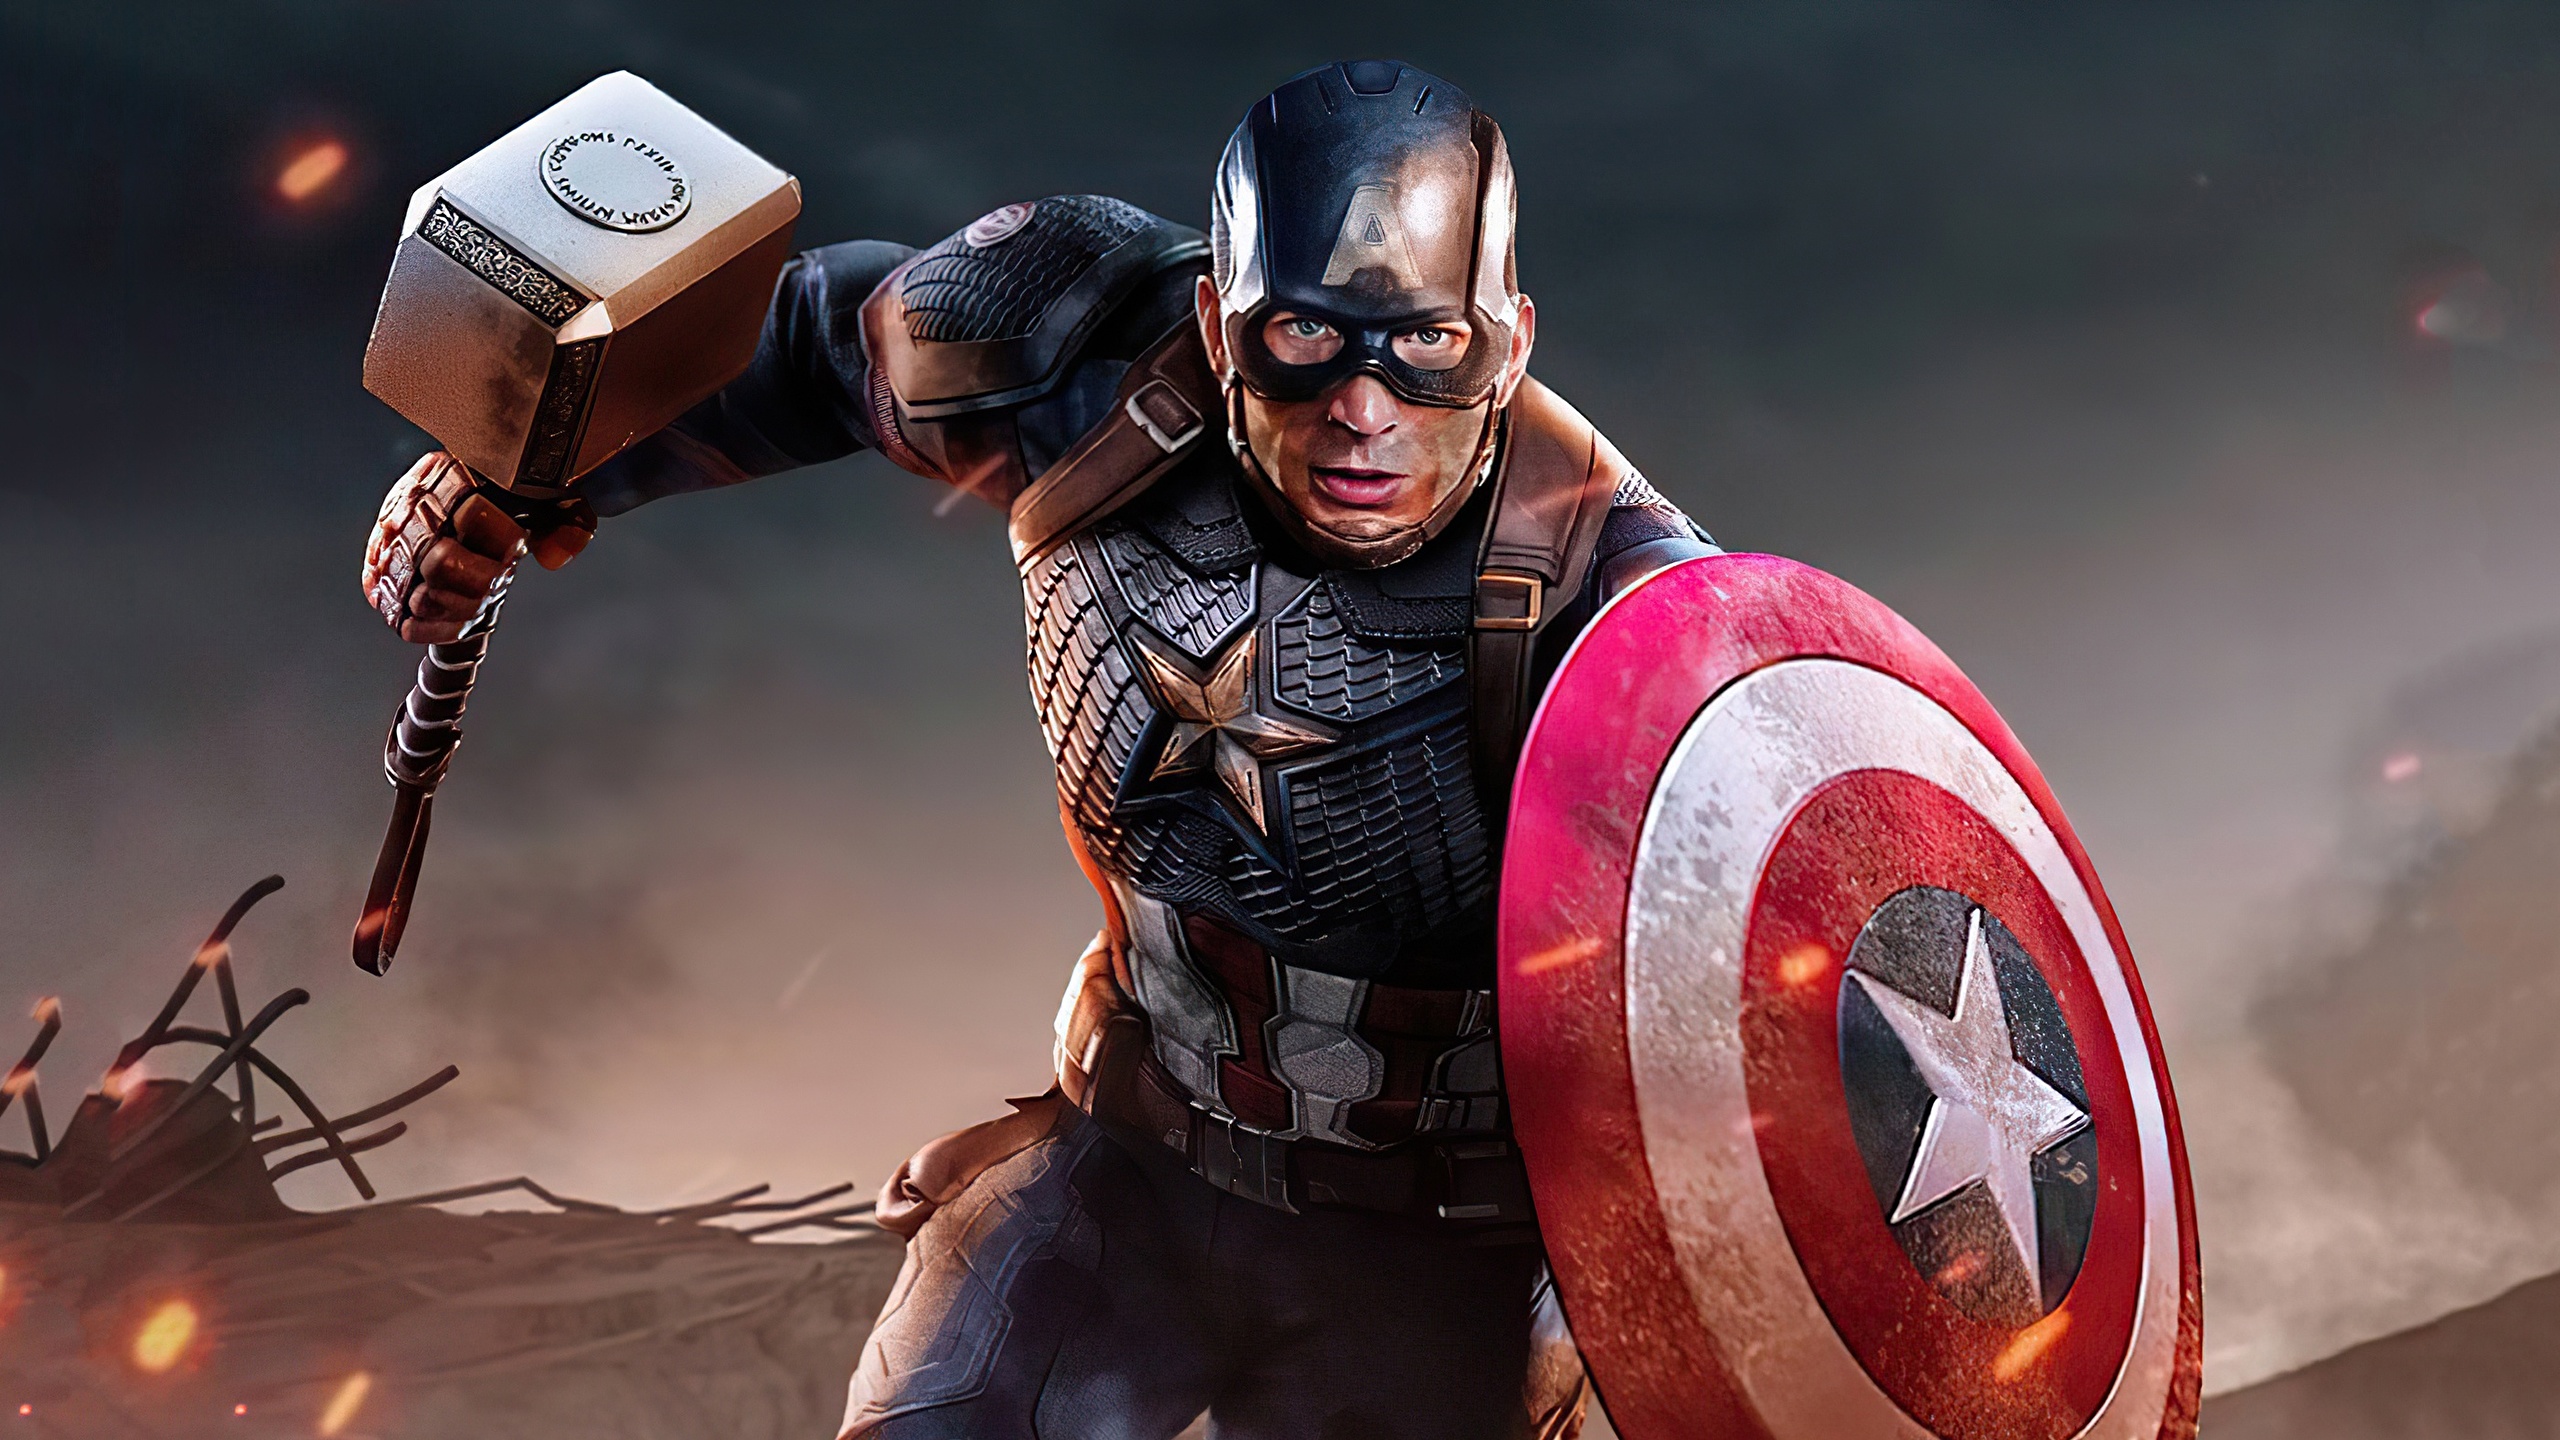 "Captain America" Chris Evans criticized the new iPhone and admitted that he misses the old iPhone 6s